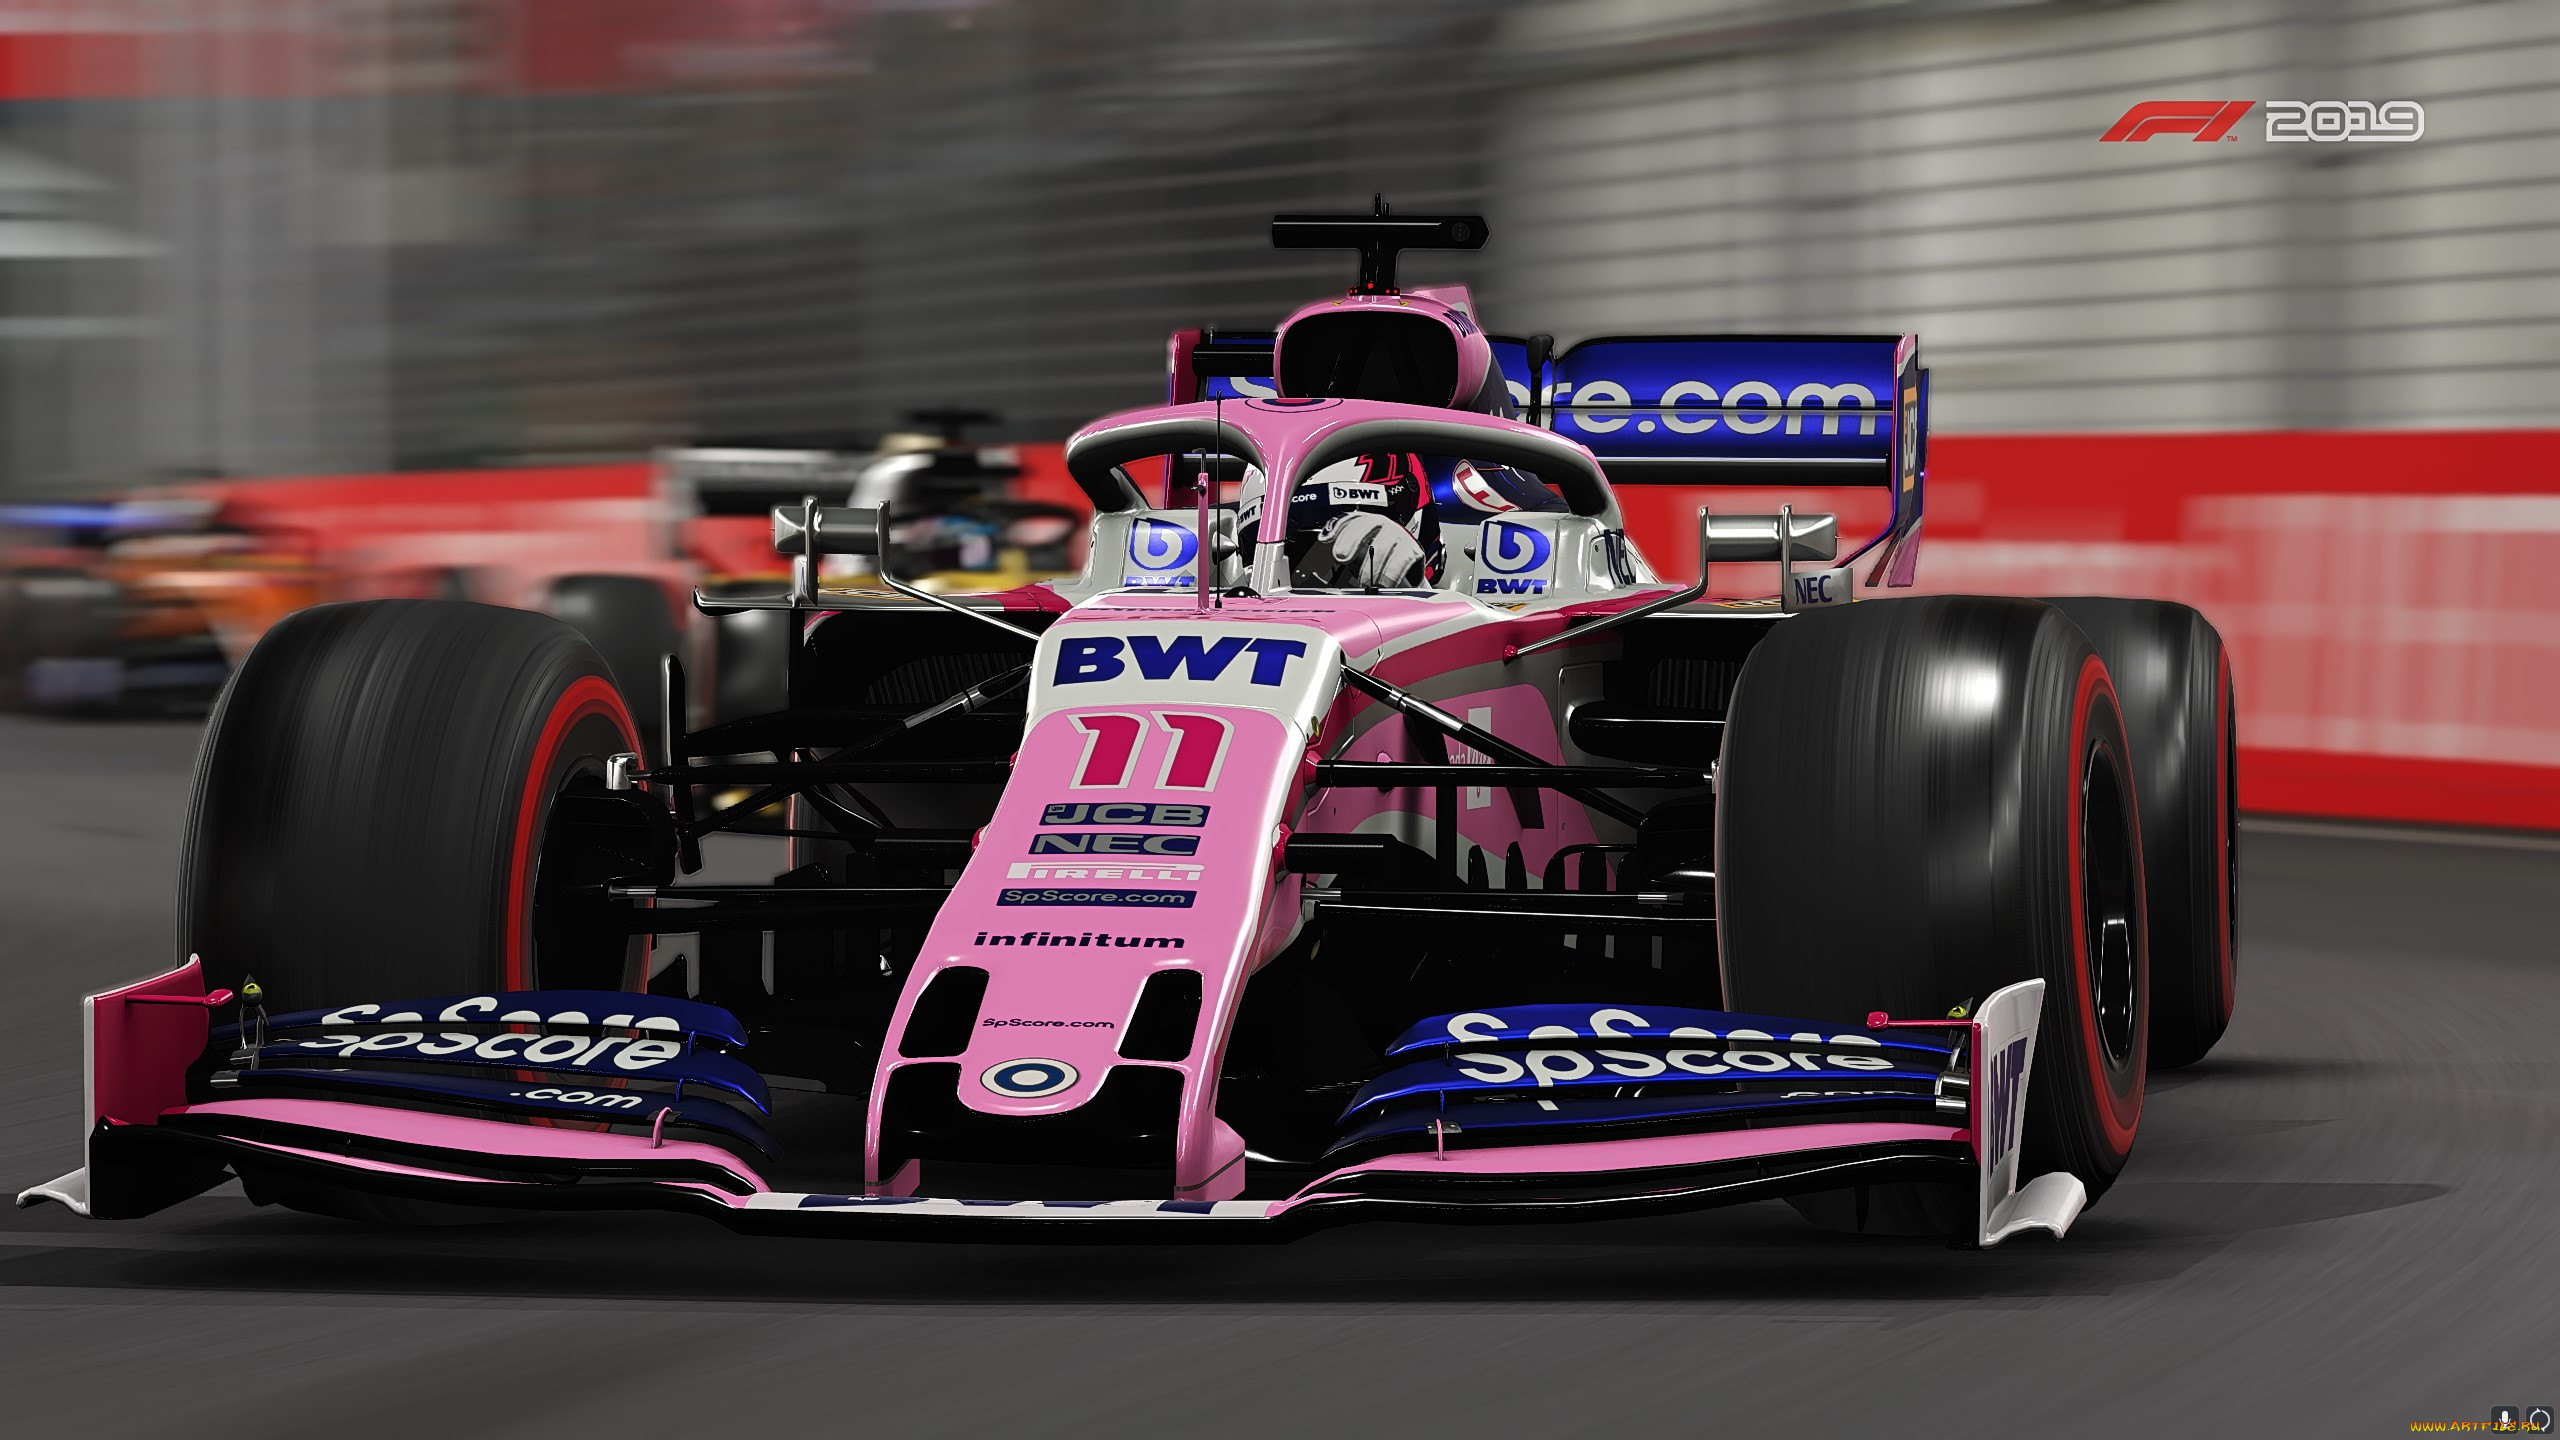  , f1 2019, racing, point, rp19, , , , f1, 2019